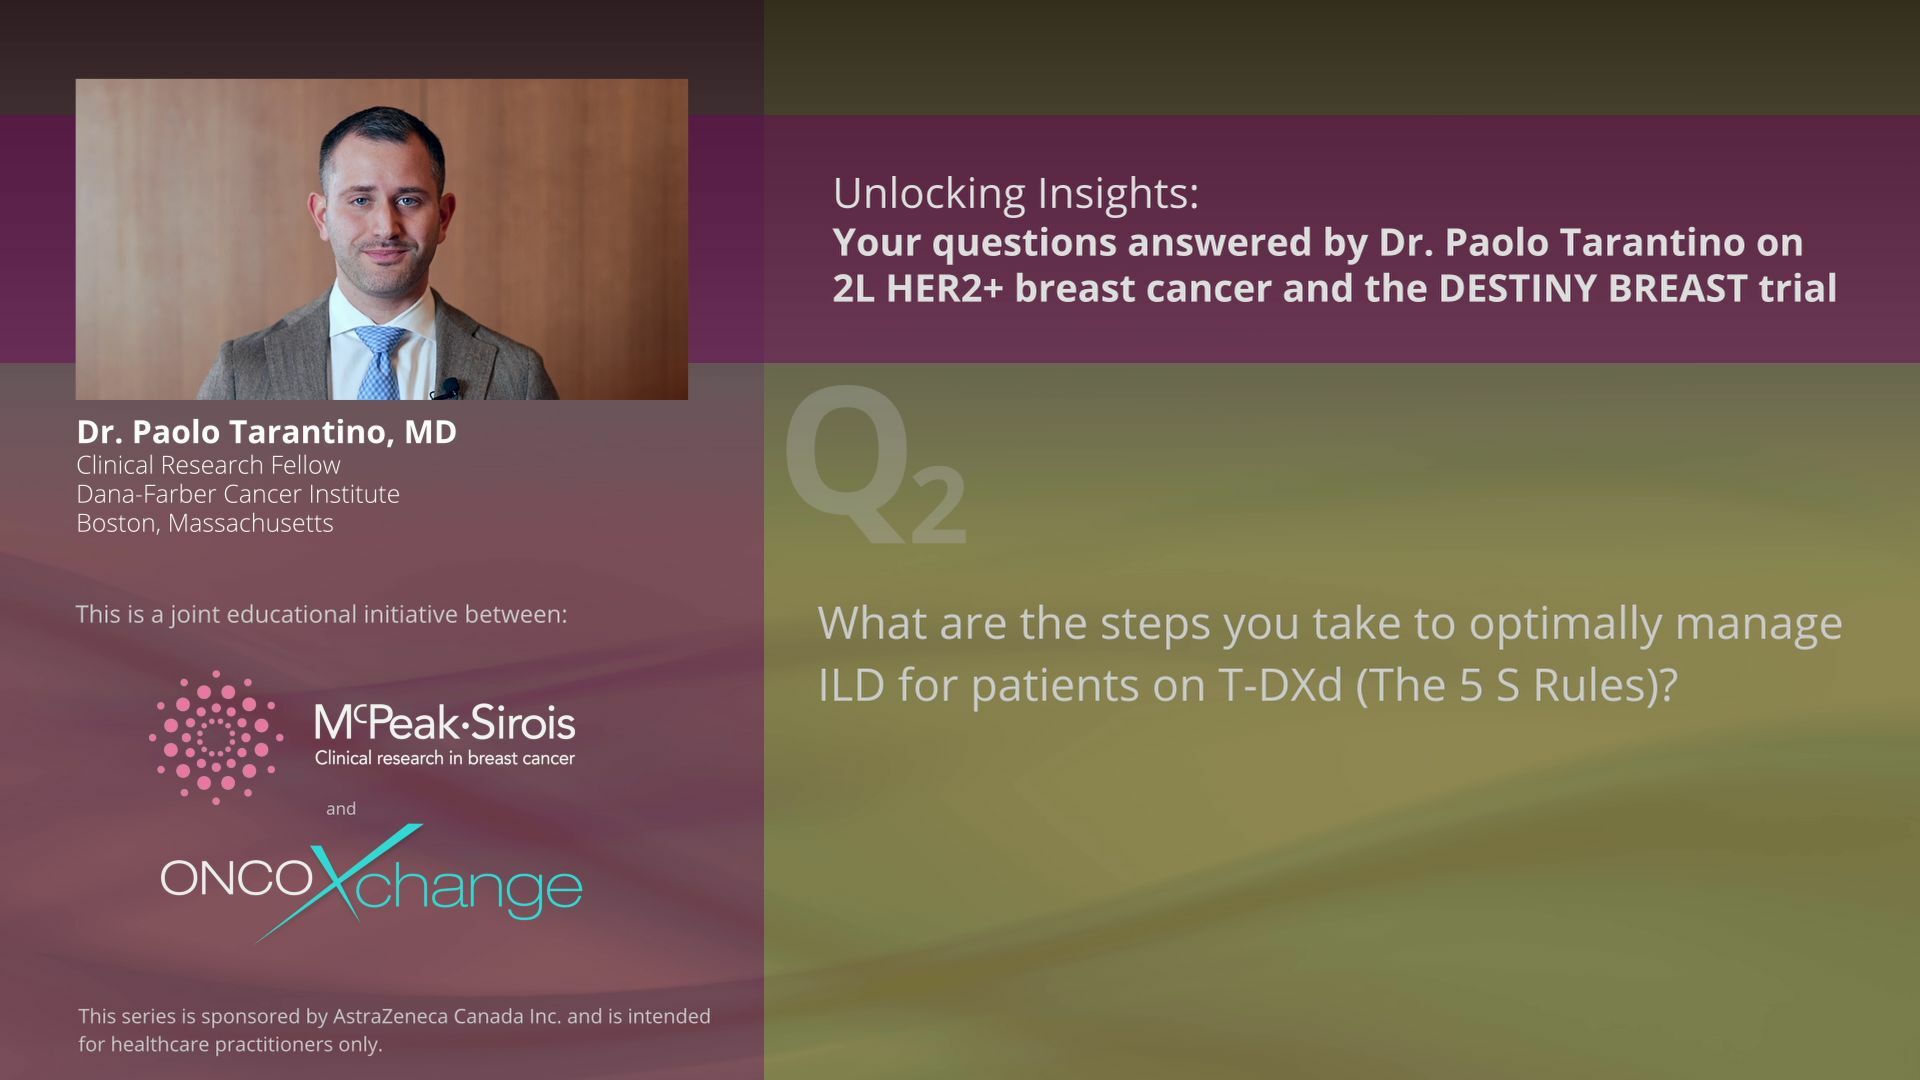 Q2: What are the steps you take to optimally manage ILD for patients on T-DXd (The 5 S Rules)?